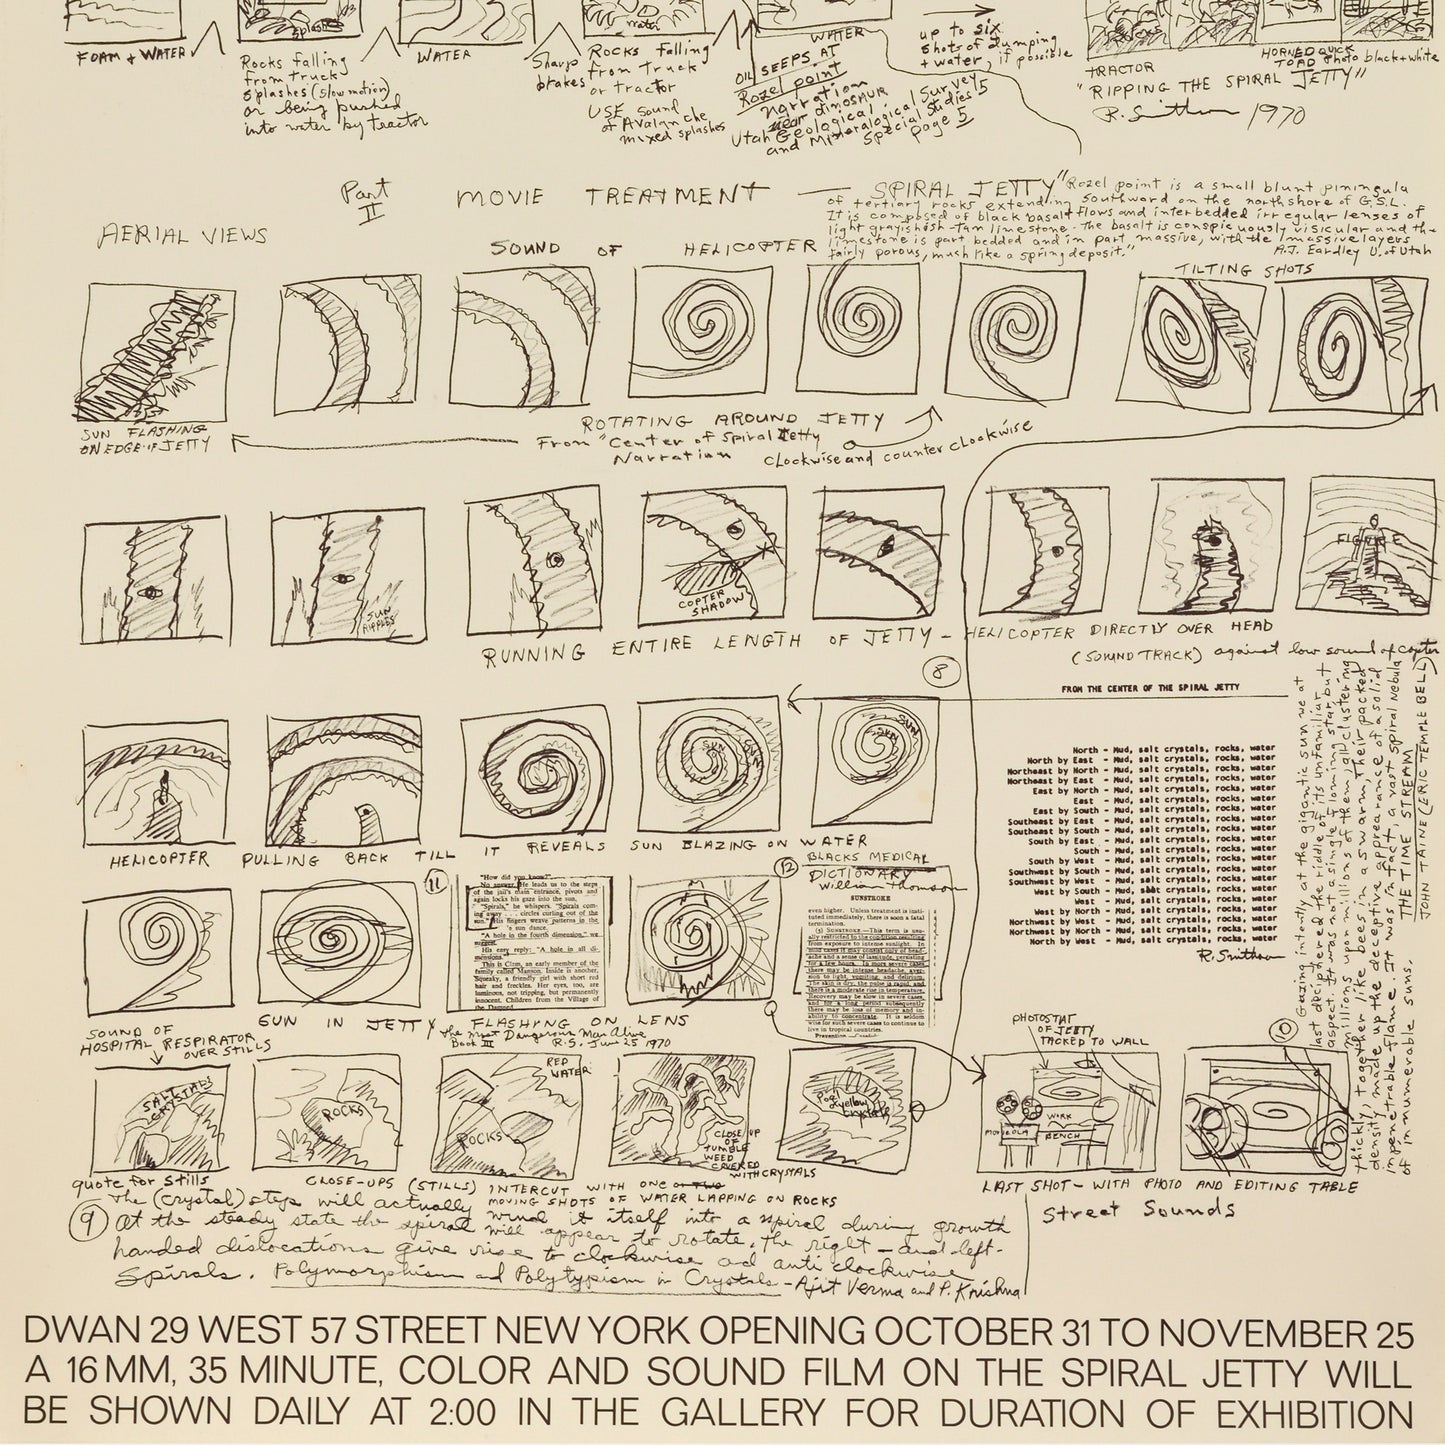 Robert Smithson: Movie Treatment Poster for Spiral Jetty